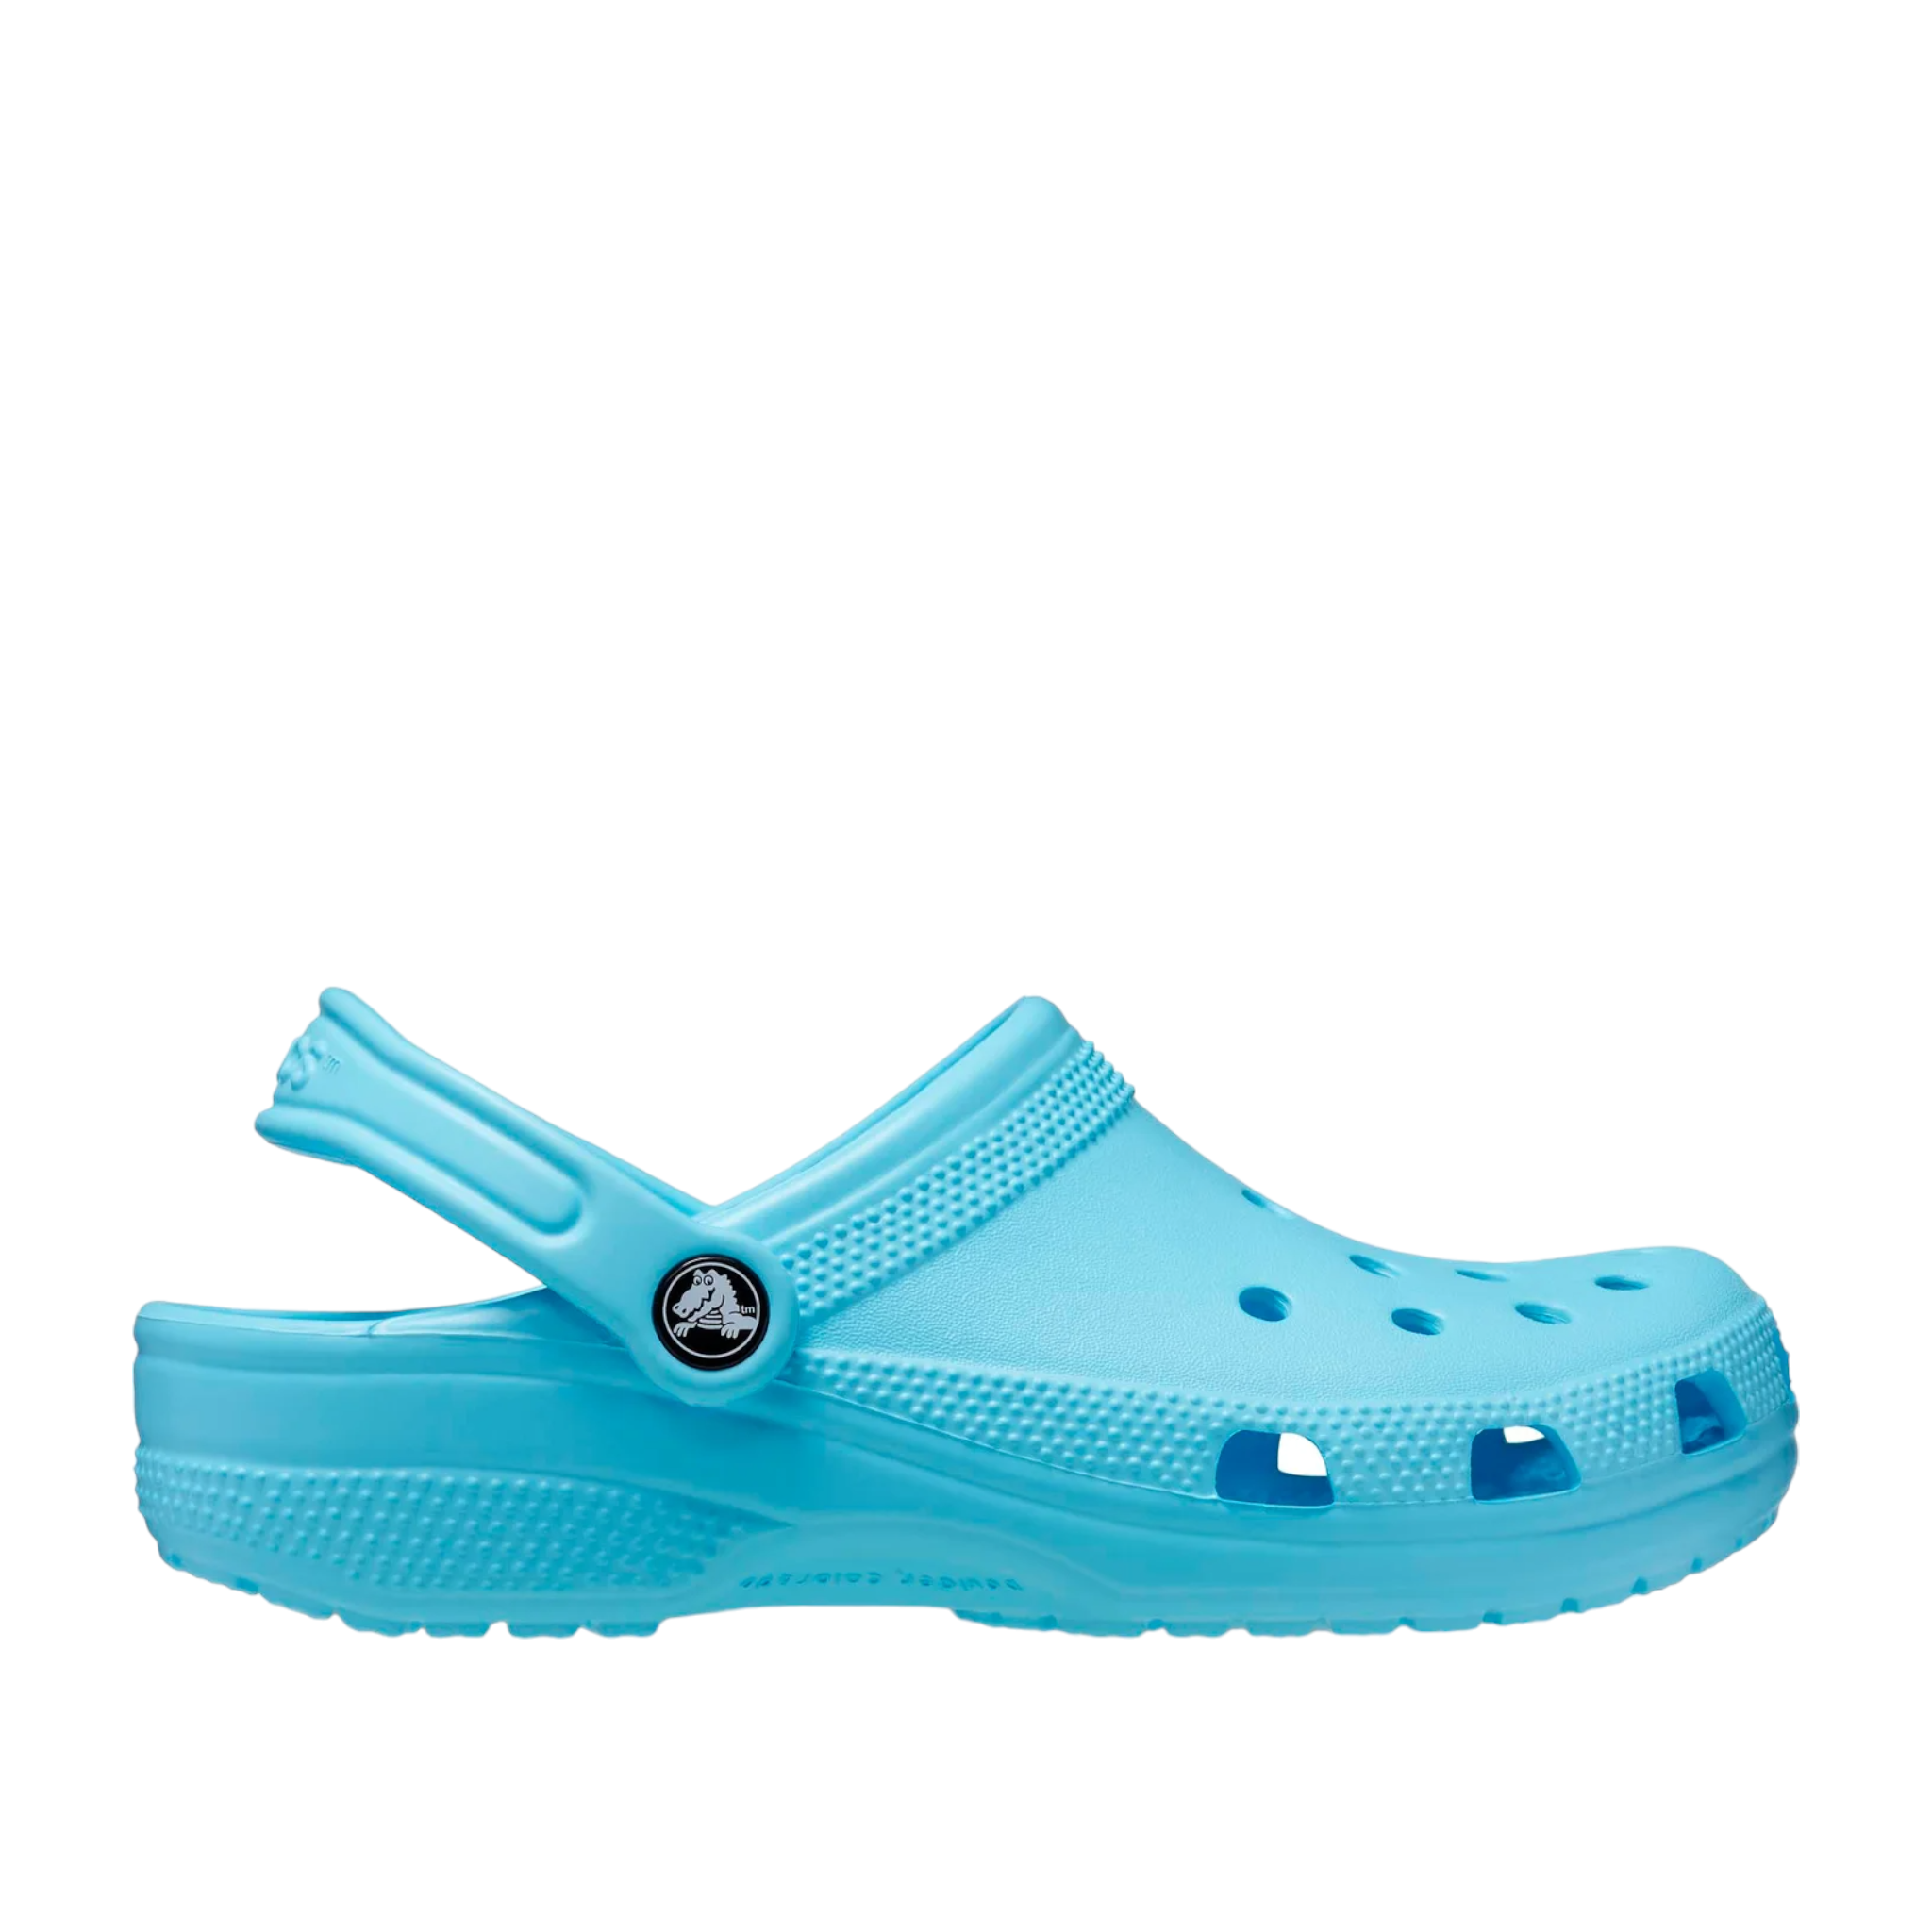 Crocs Classic Clogs online and instore with shoe&amp;me Mount Maunganui. Shop arctic Clogs